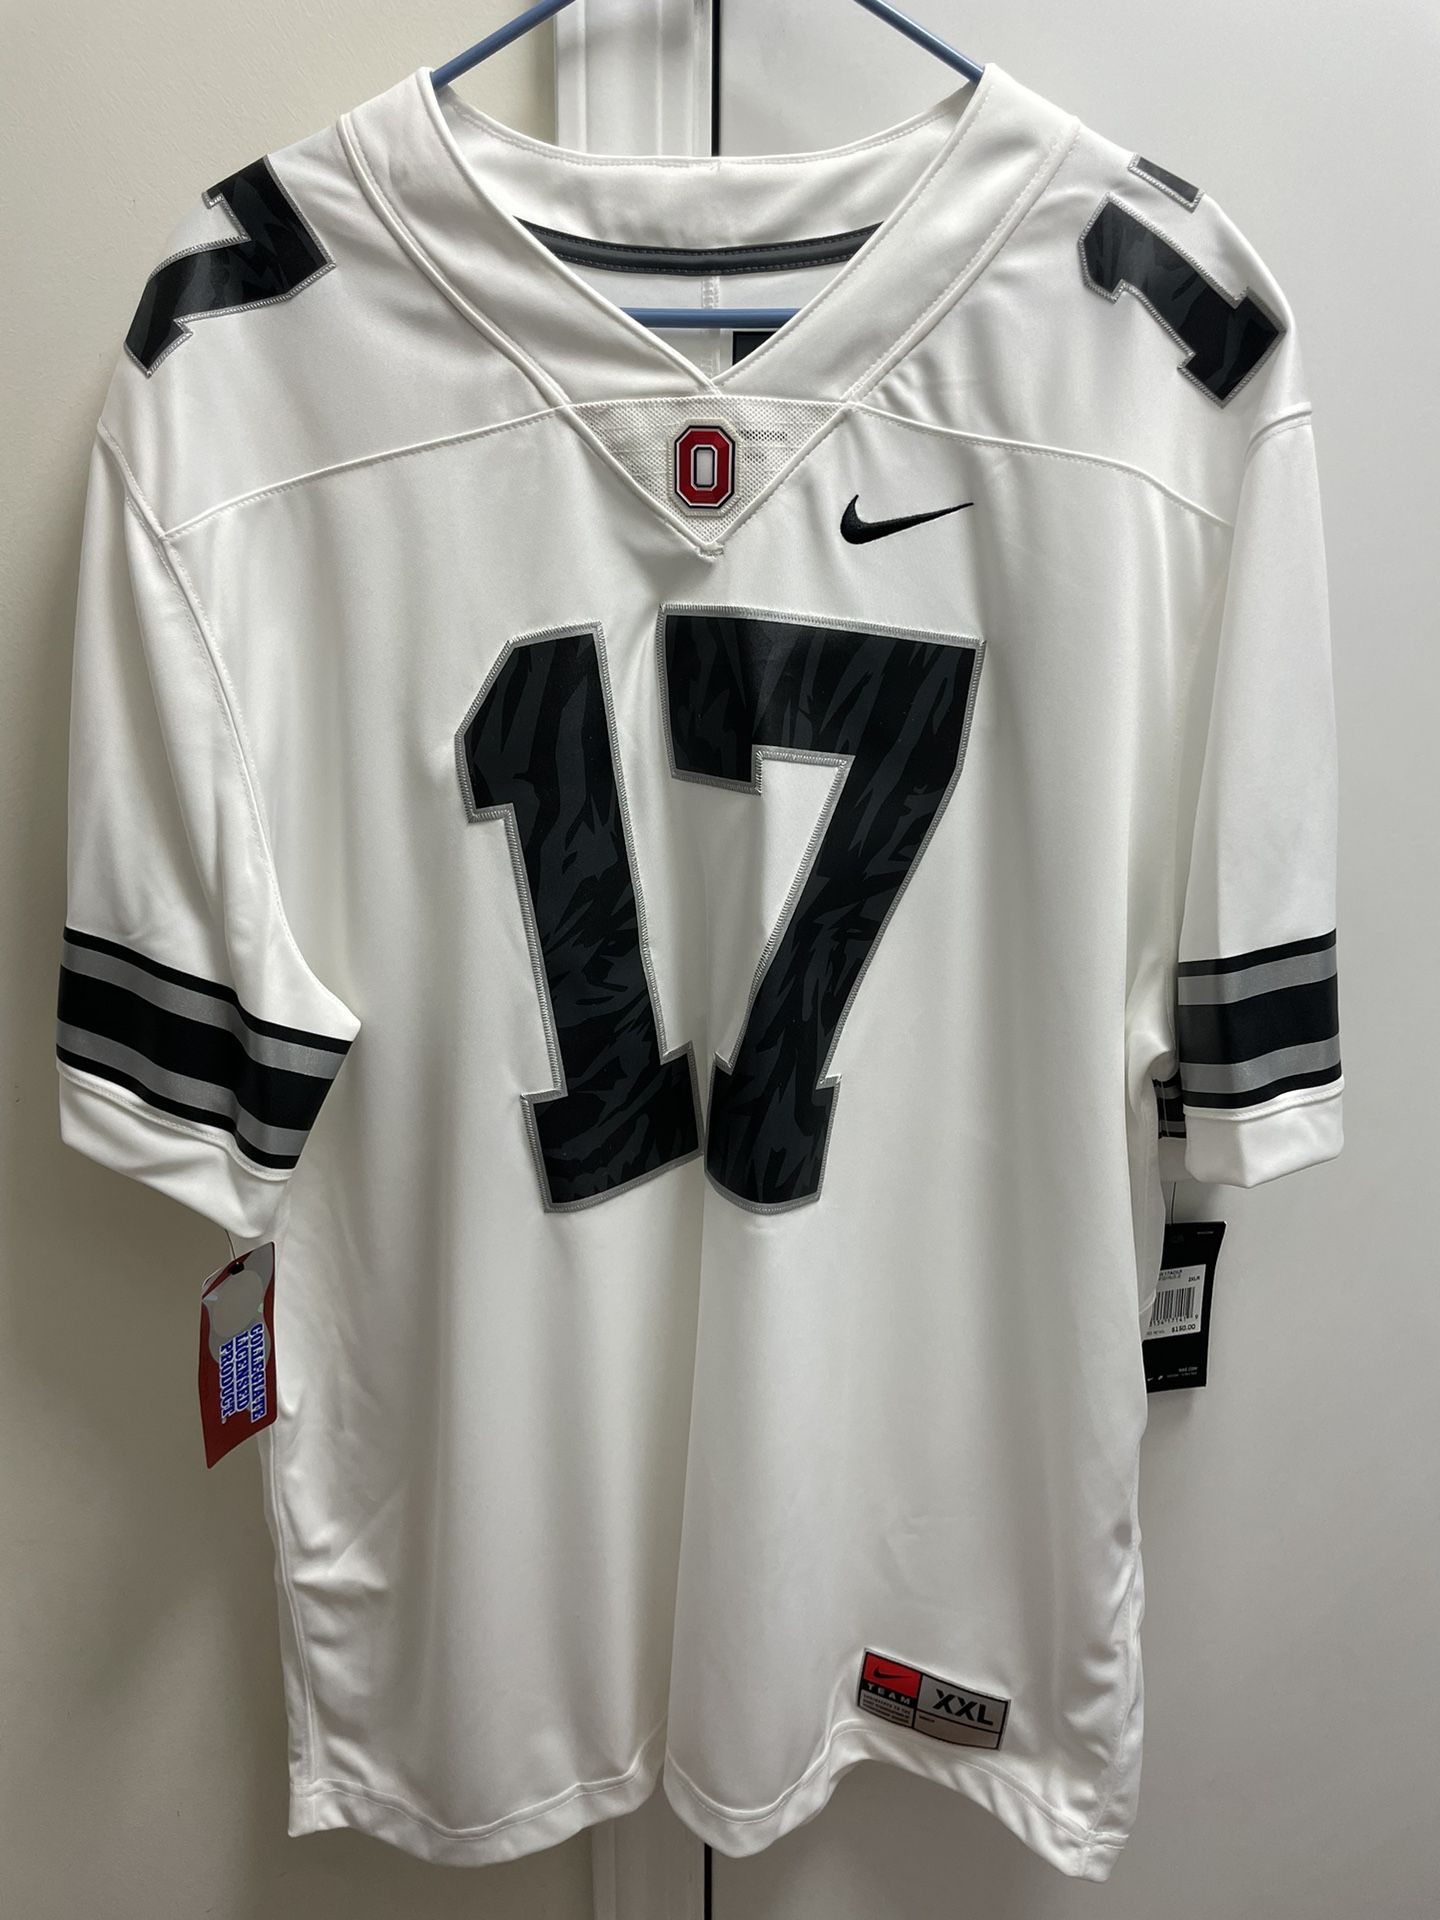 Nike College Limited Plus (ohio State) Men's Football Jersey in